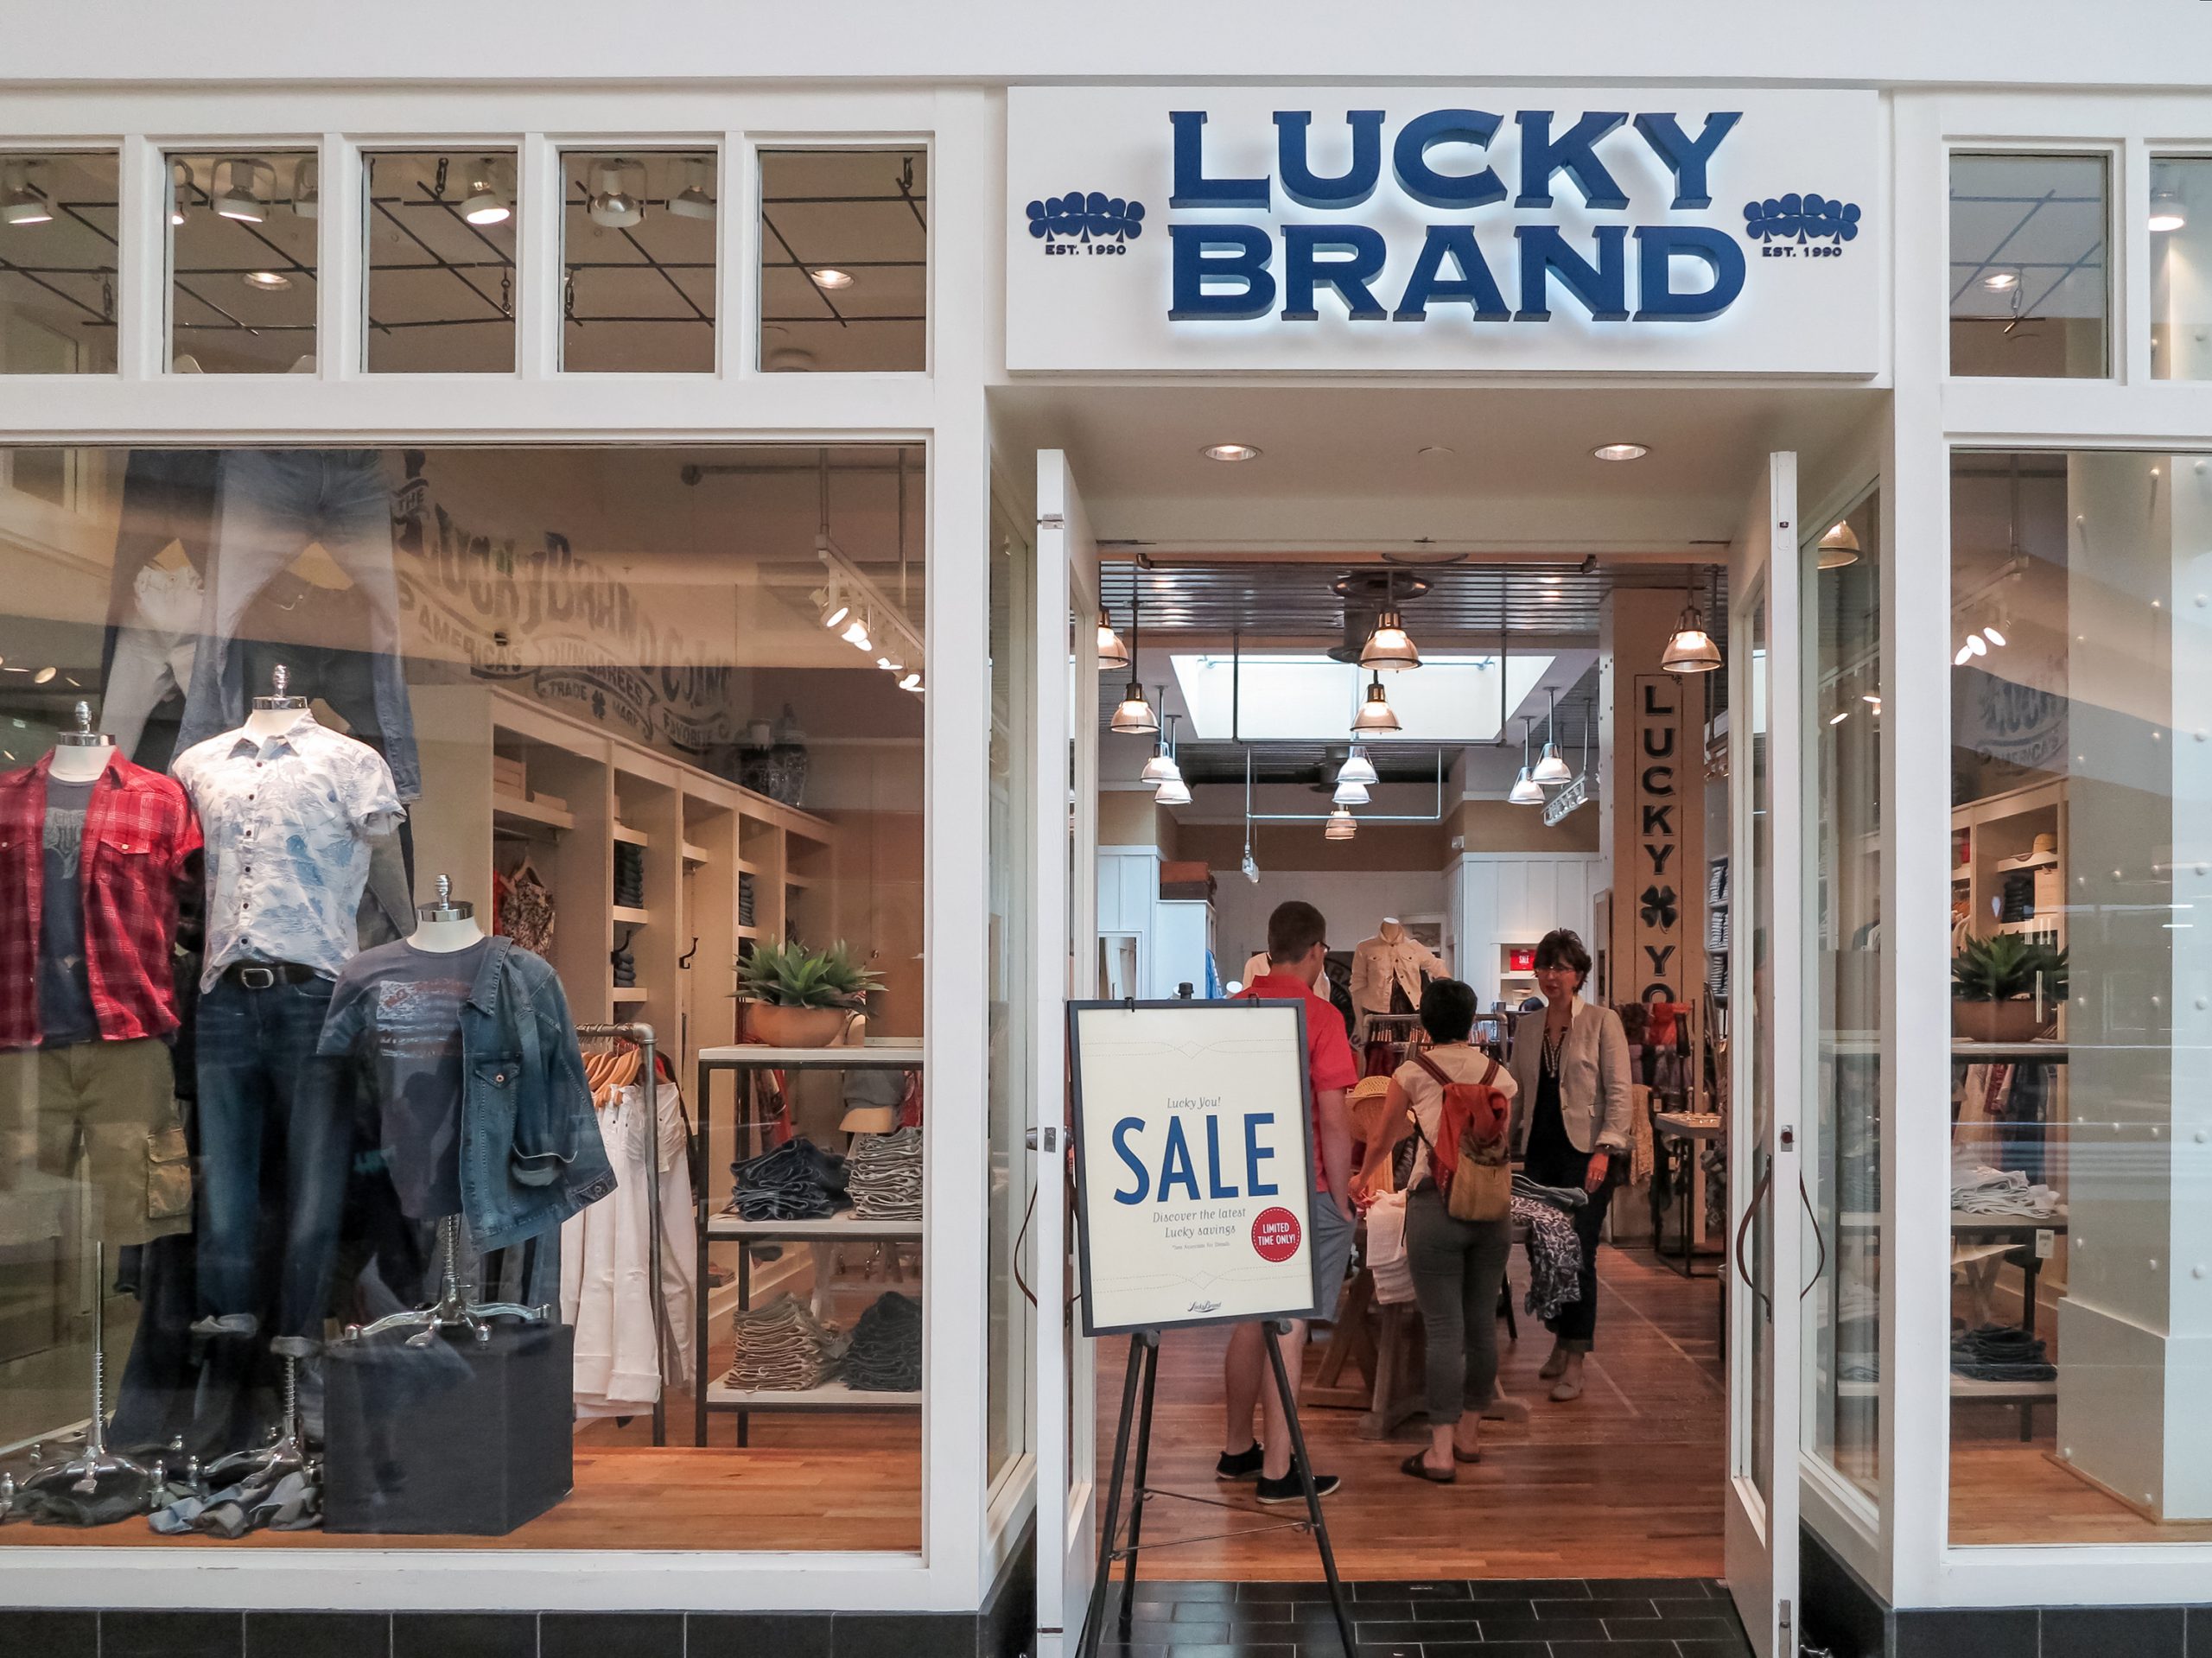 lucky brand jeans retailers